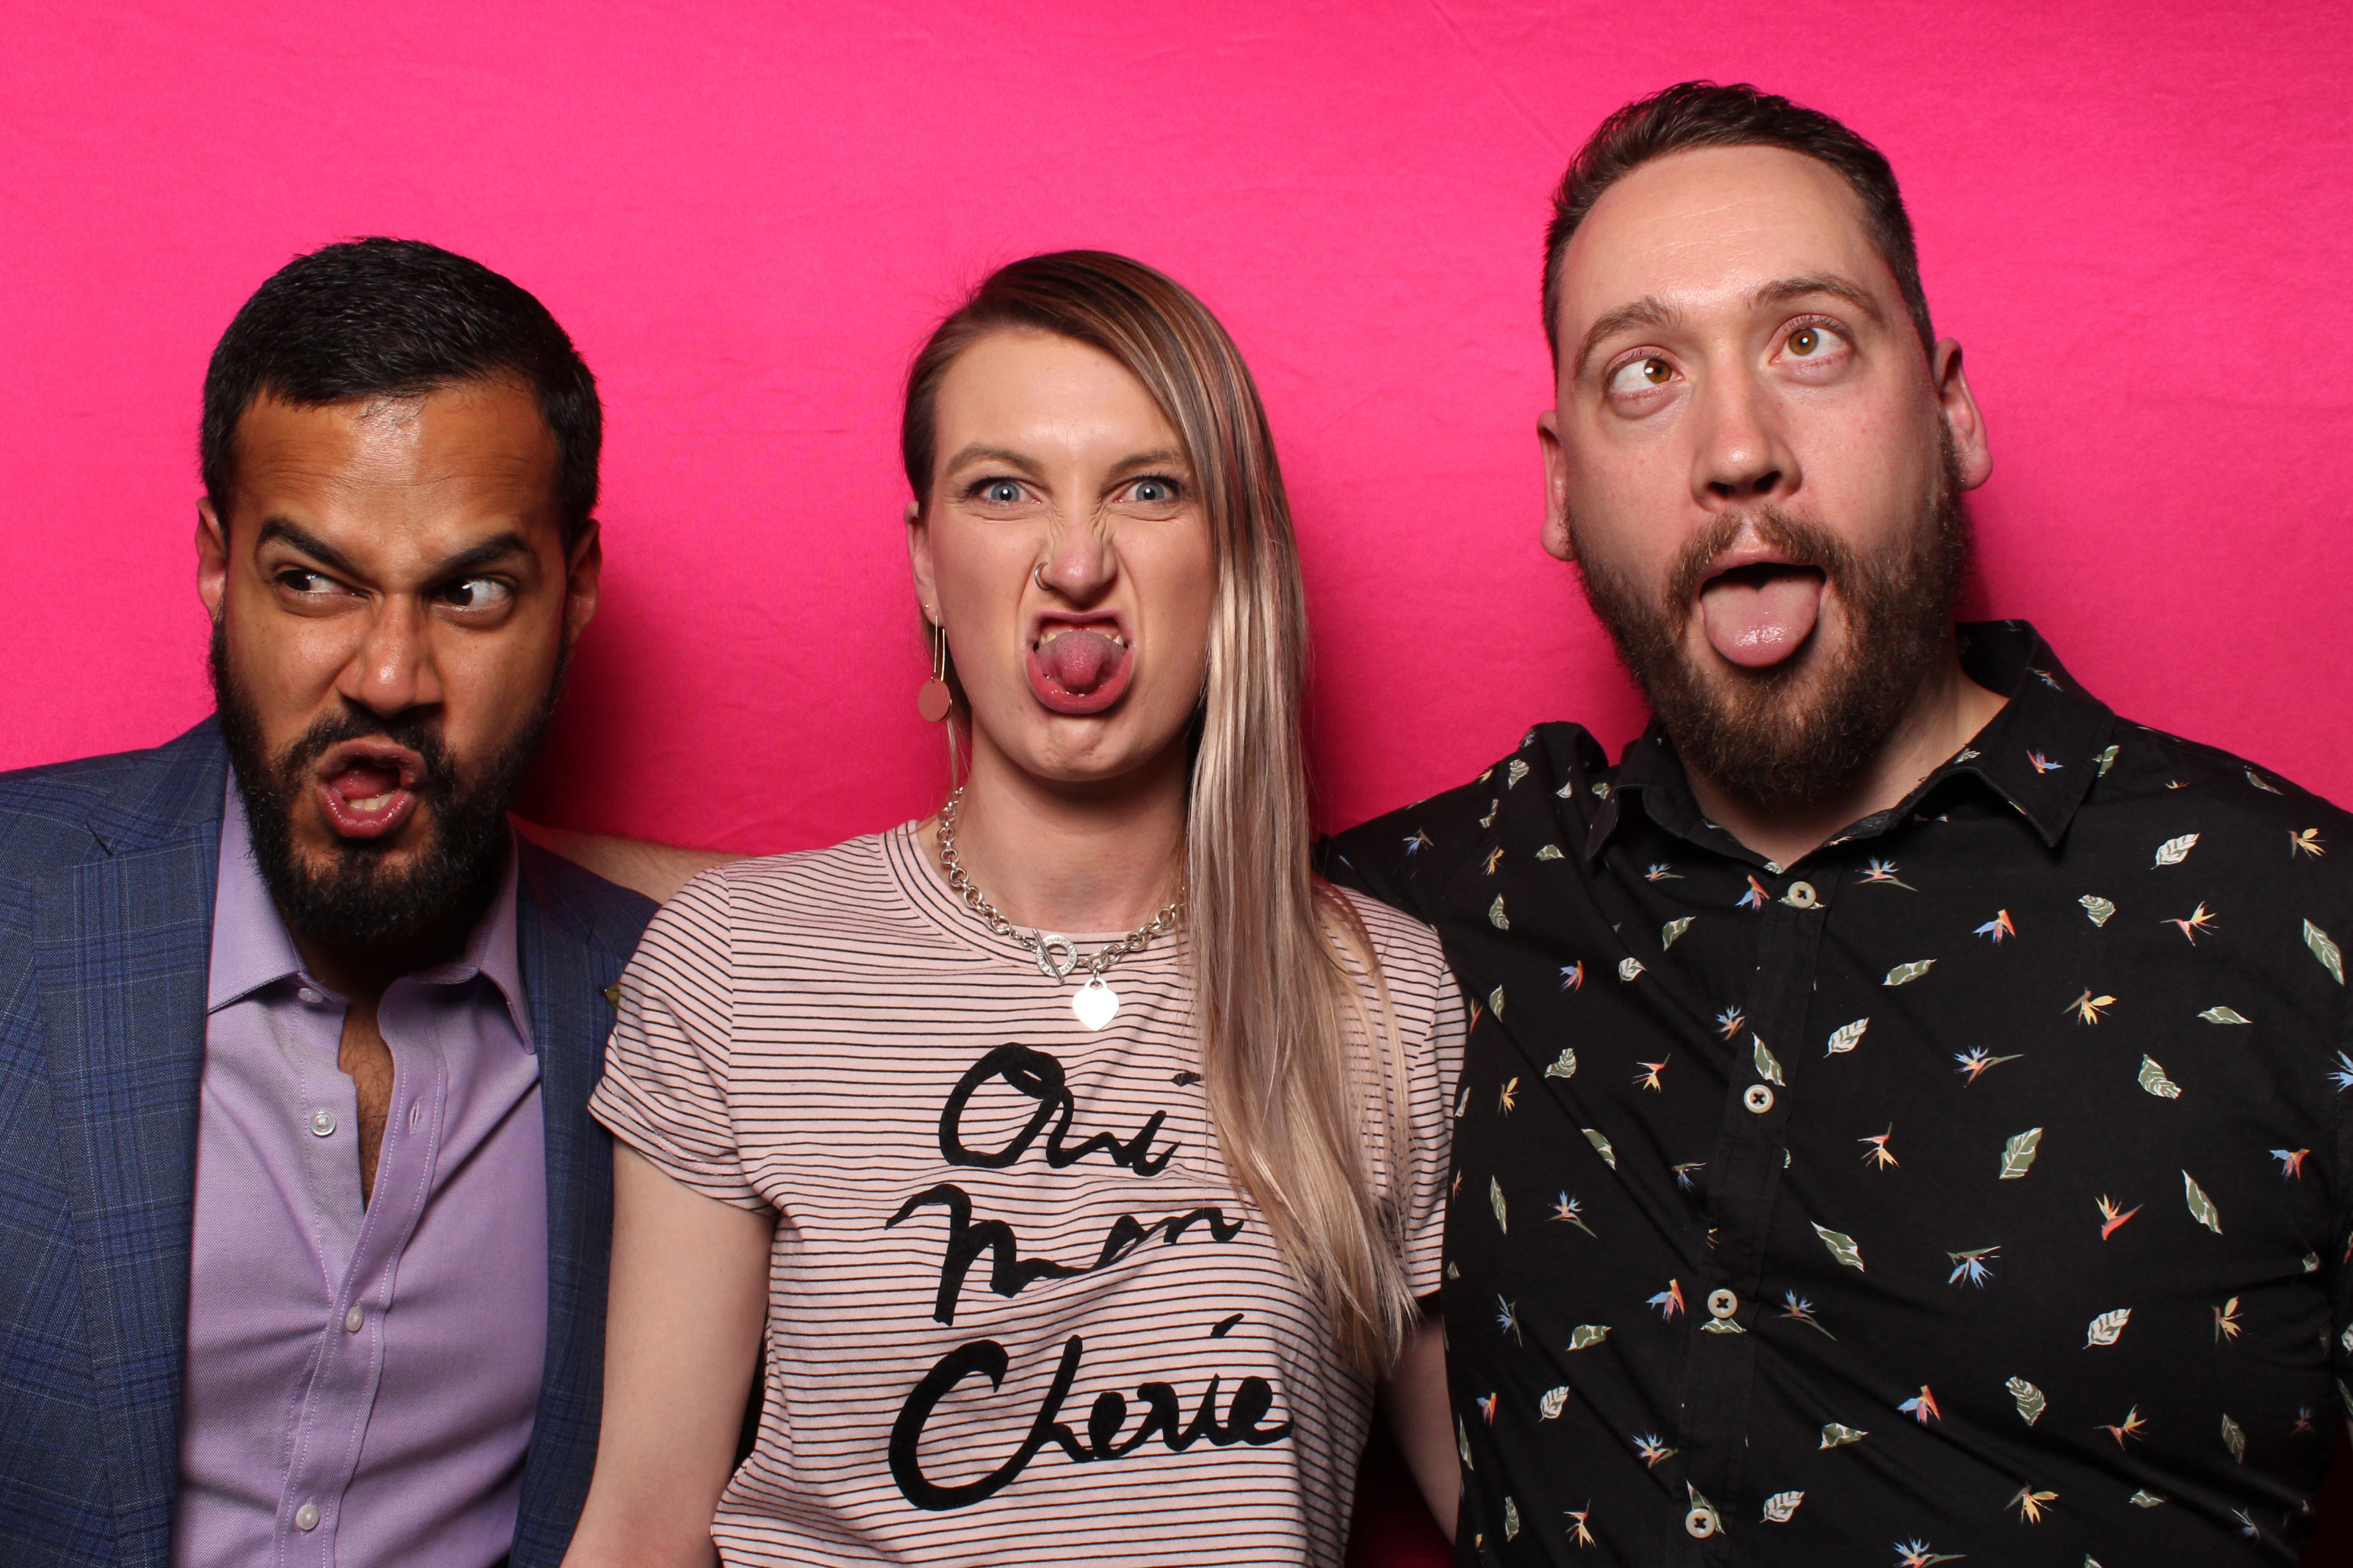 Three people pulling faces infront of a pink backdrop